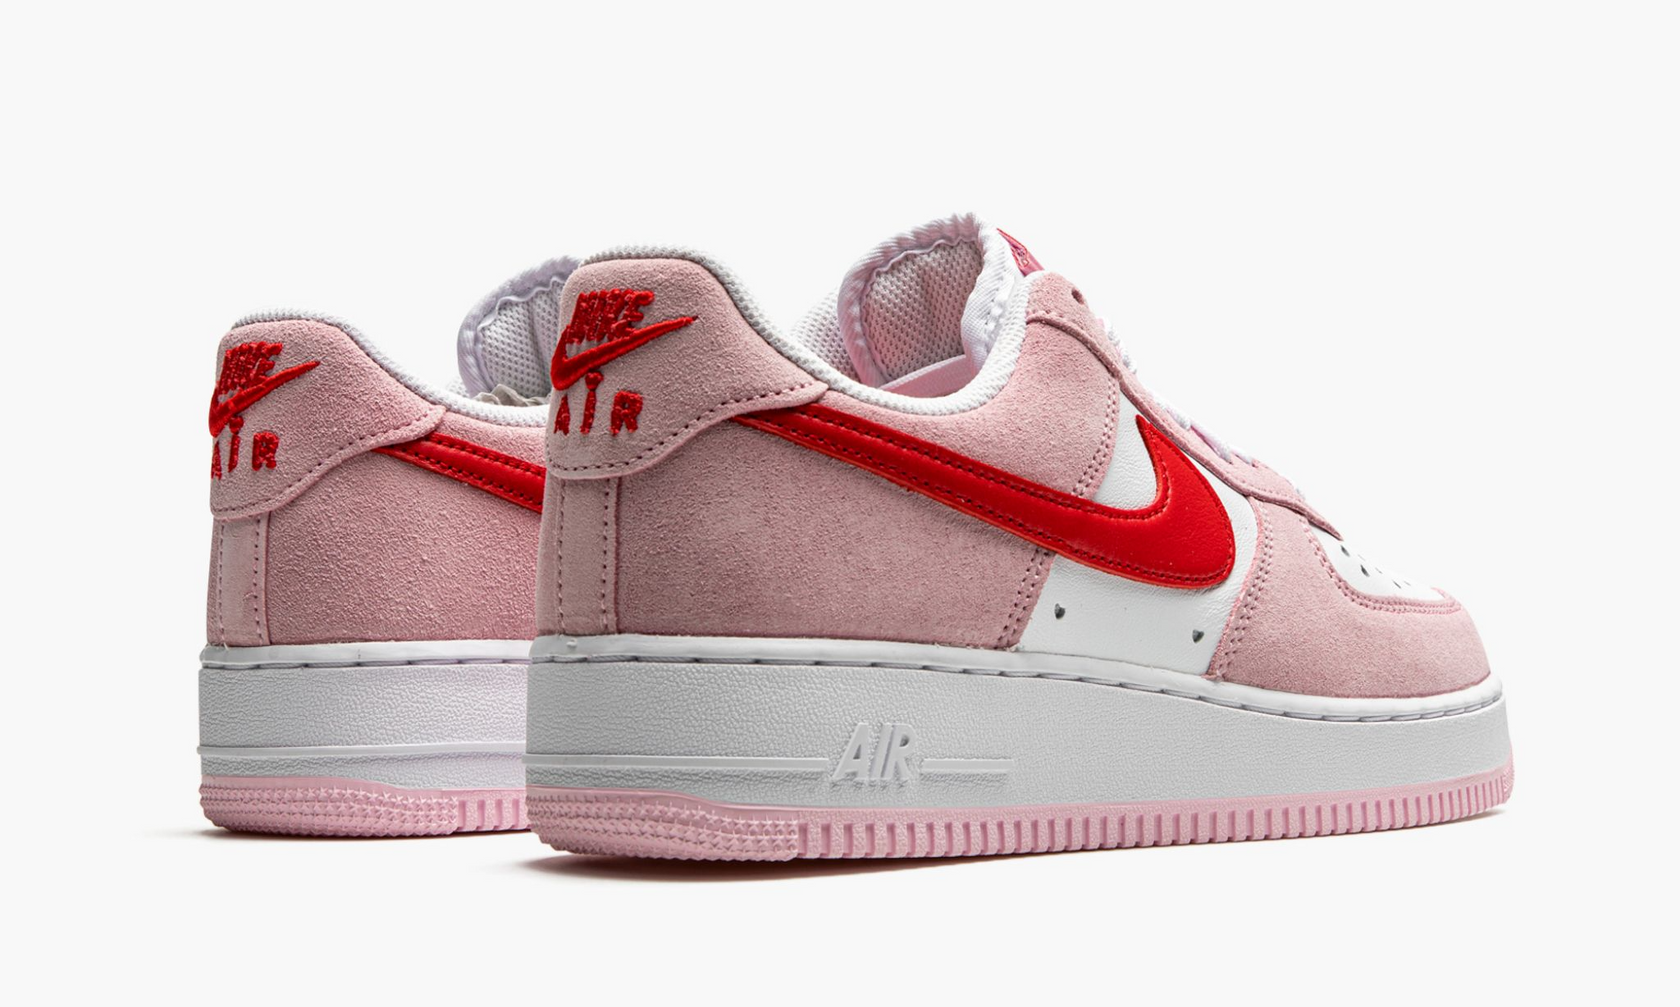 Air force 1 low valentine s day. Nike Air Force 1 Low “Valentine’s Day” 2023. Nike Air Force 1 Low Valentines Day. Кроссовки Nike Air Force 1 Low Valentine's Day. Nike Air Force 1 Low 07 Valentine's Day.